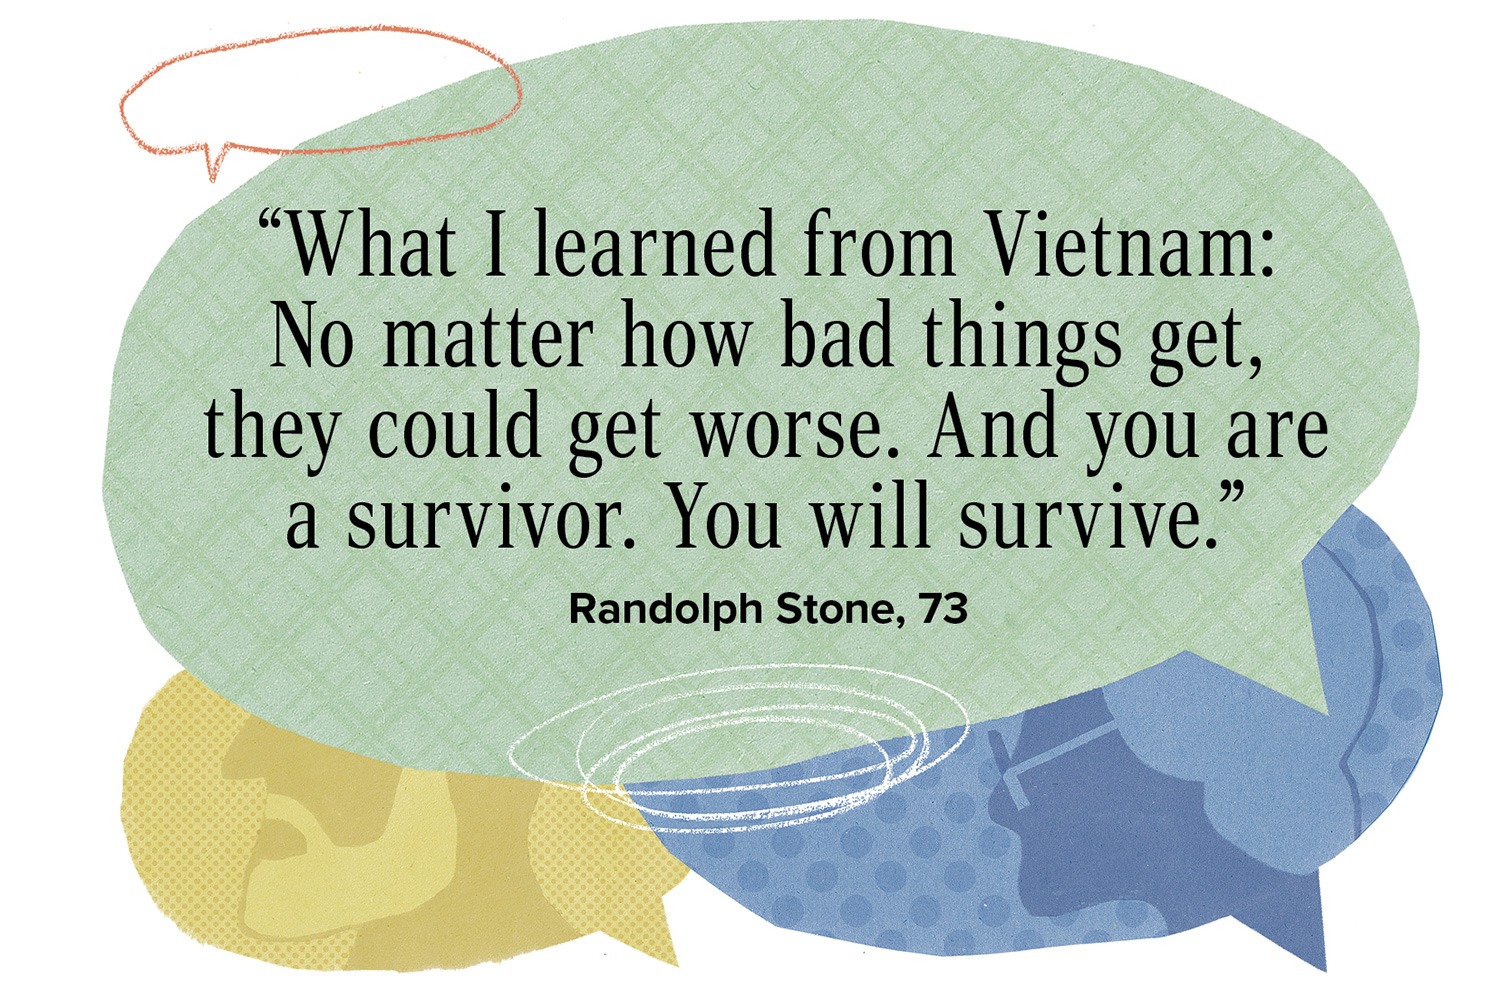 “What I learned from Vietnam: No matter how bad things get, they could get worse. And you are a survivor. You will survive.”  Randolph Stone, 73